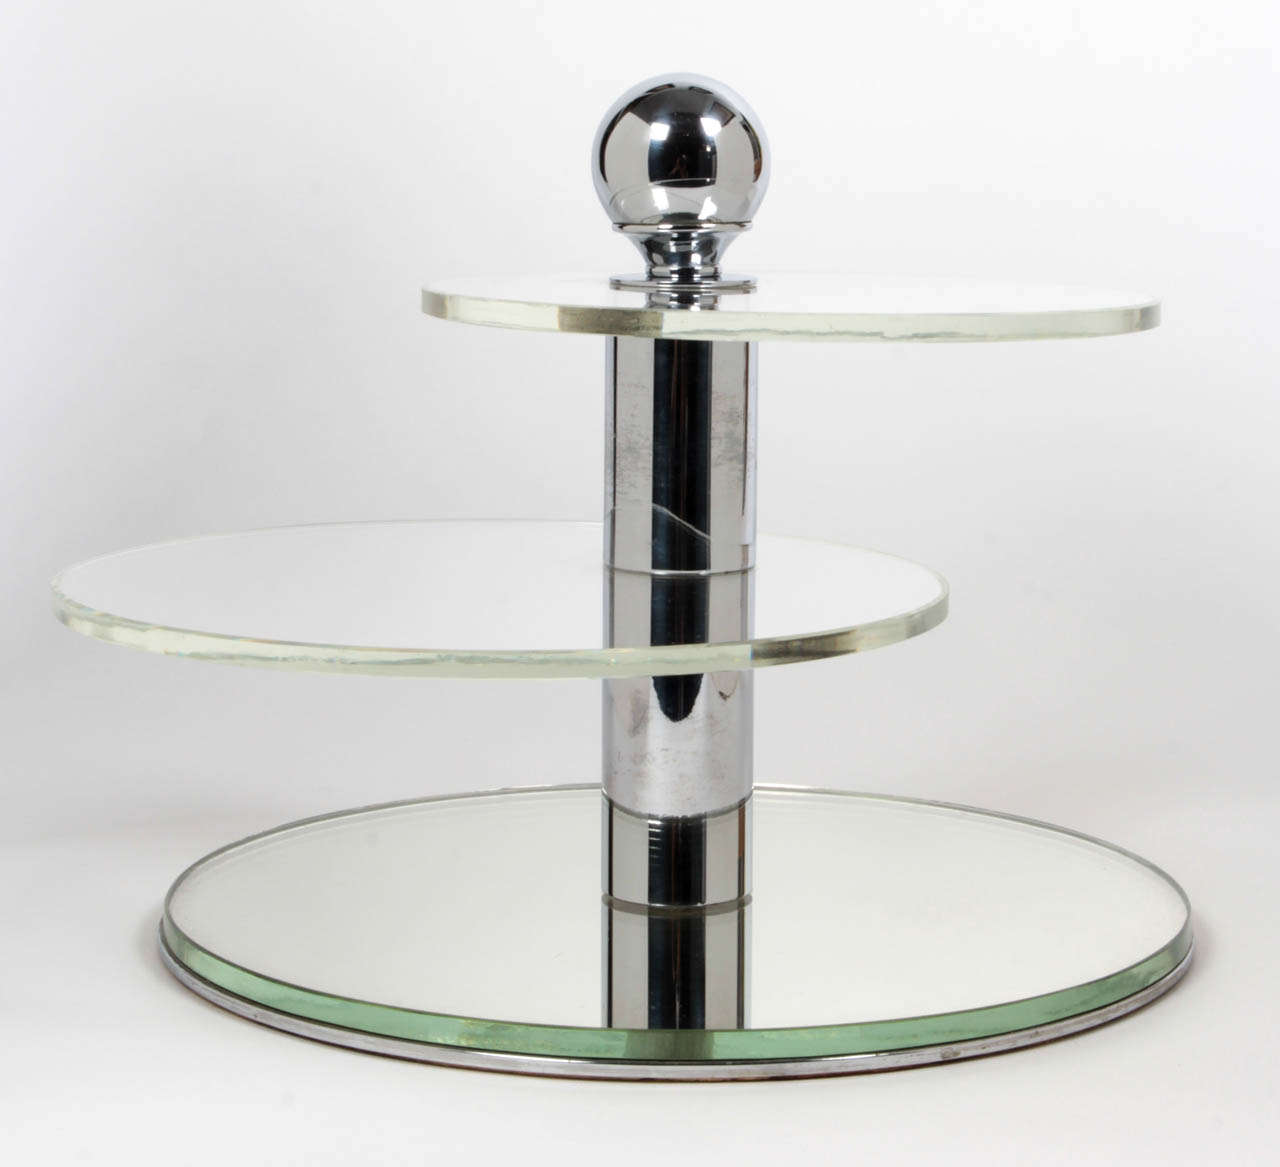 DONALD DESKEY  attributed (1894-1989)  USA
DESKEY-VOLLMER, INC.  (maker)

Modernist intersecting-circles store display  c.1928-30

Chrome-plated sphere and cylindrical shaft and details, original plate glass shelves and mirrored base